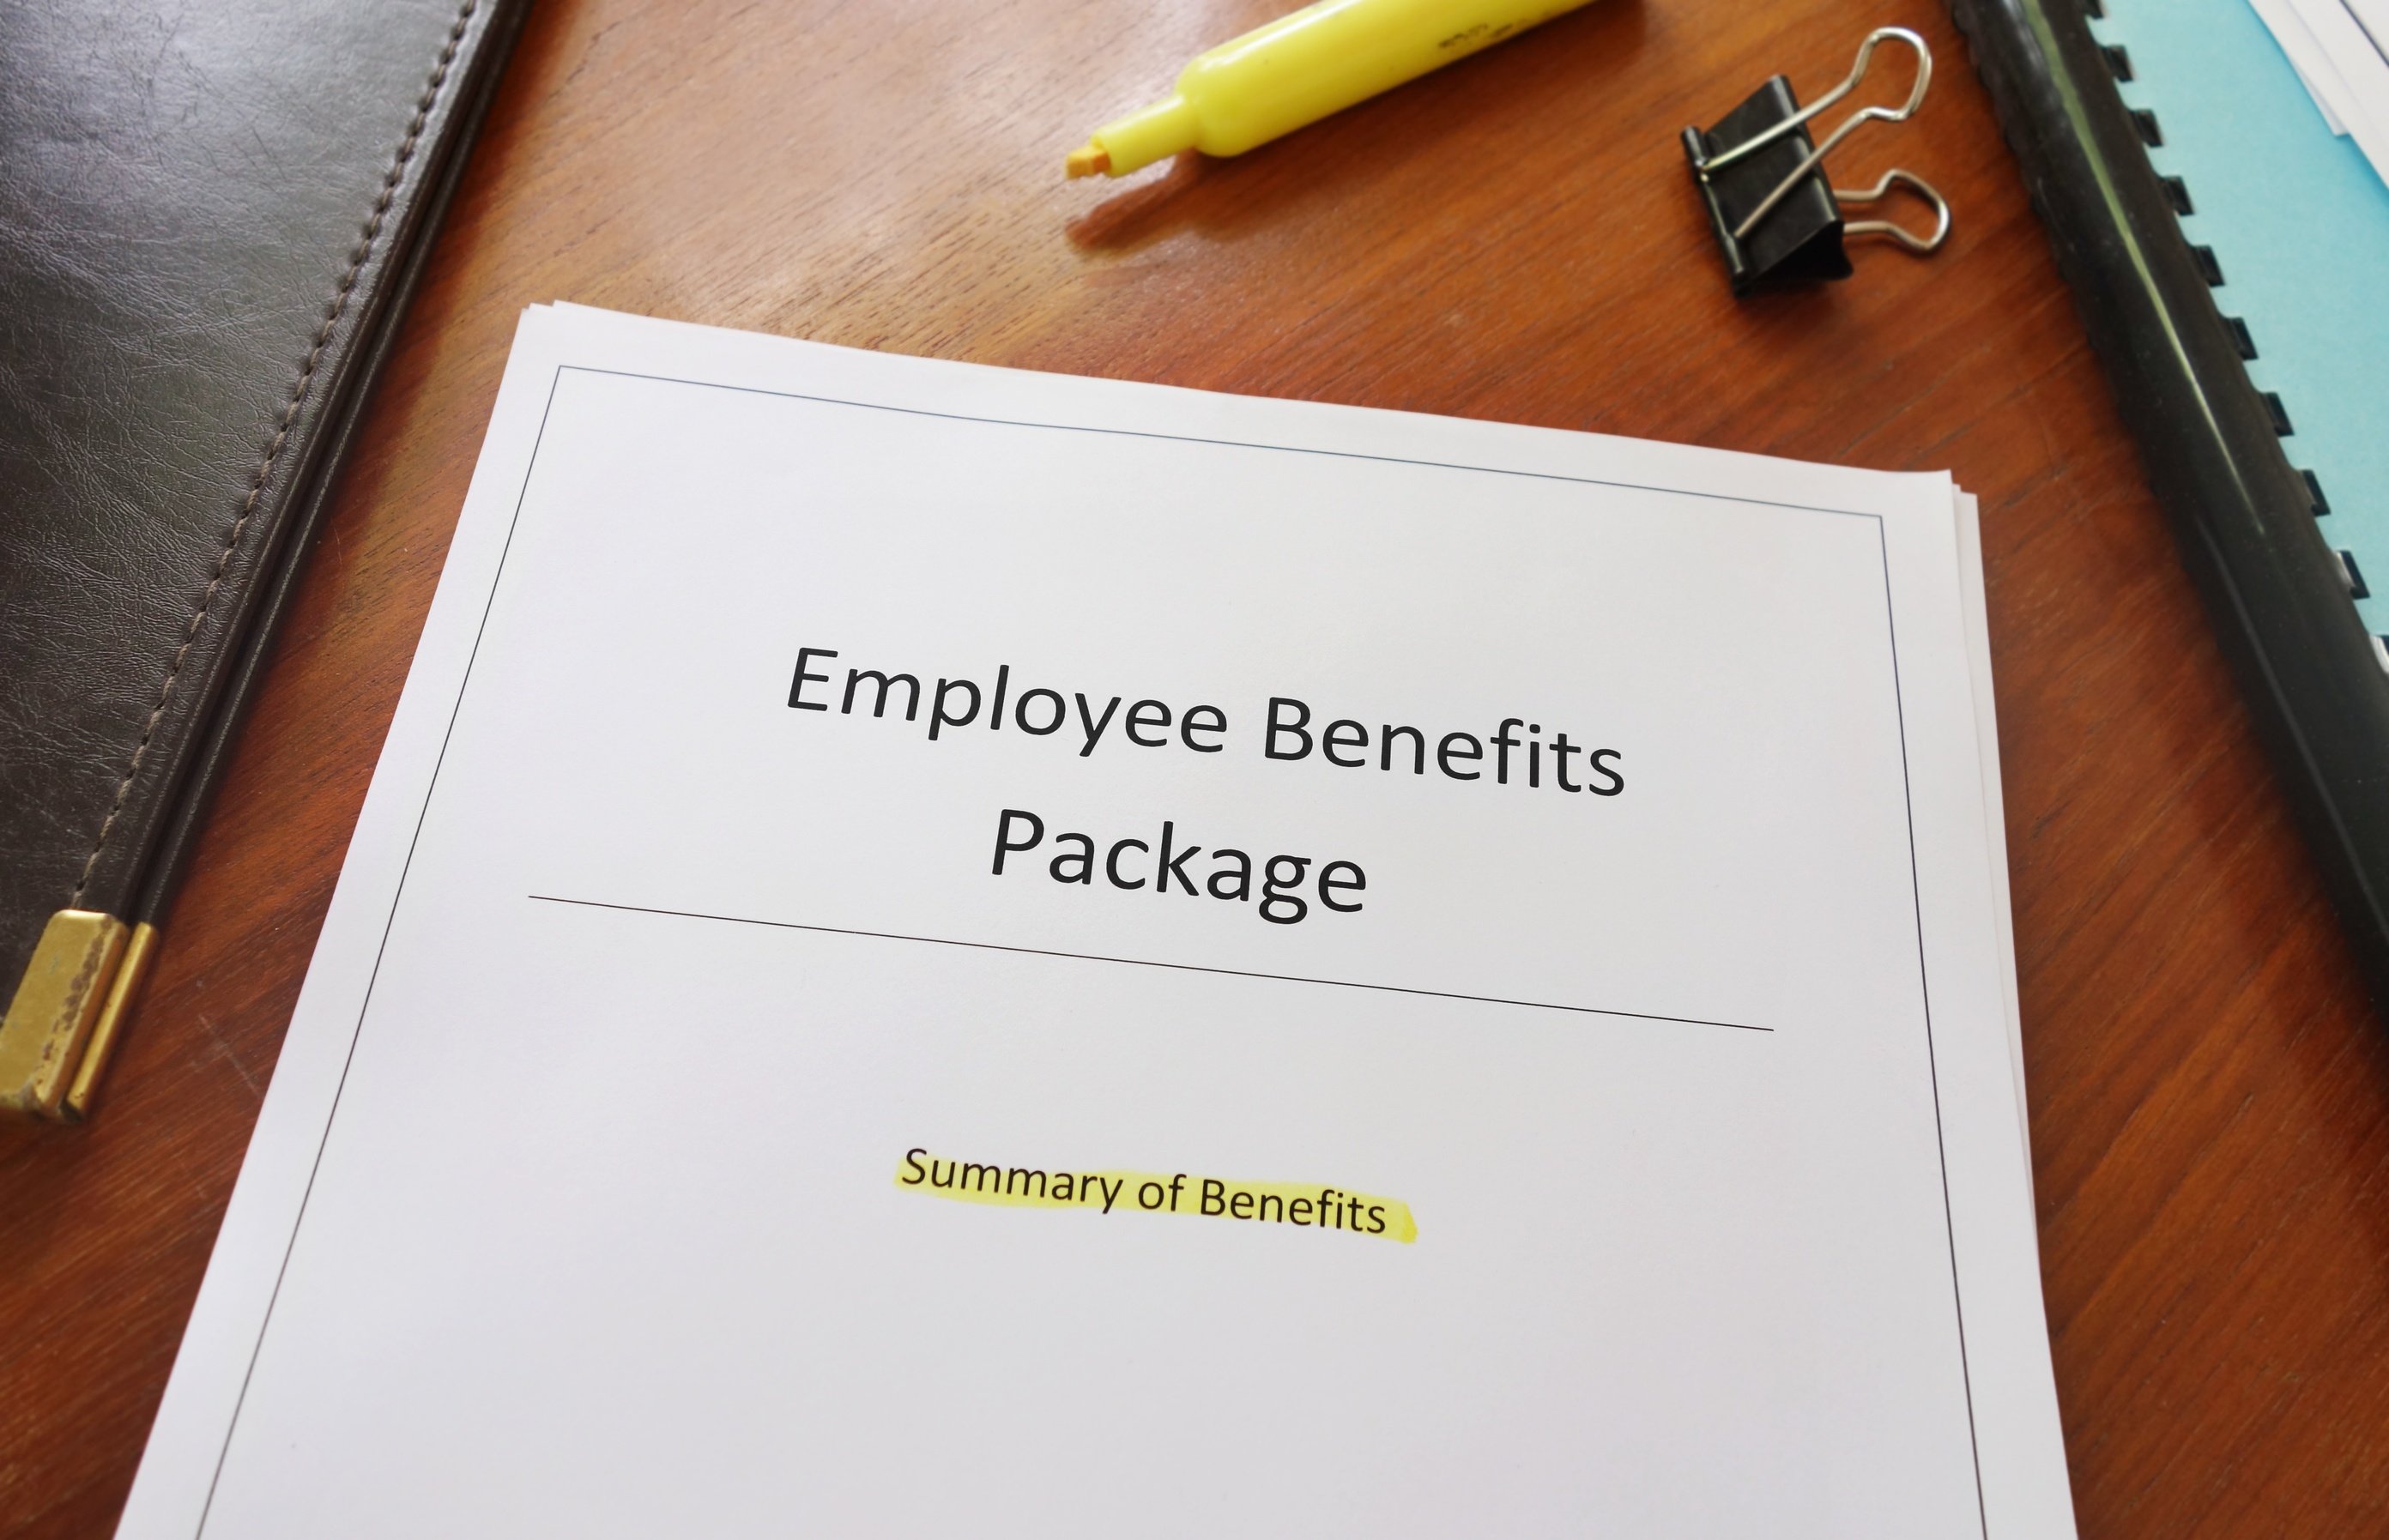 Are You Ready To Create Your Employee Benefits Program